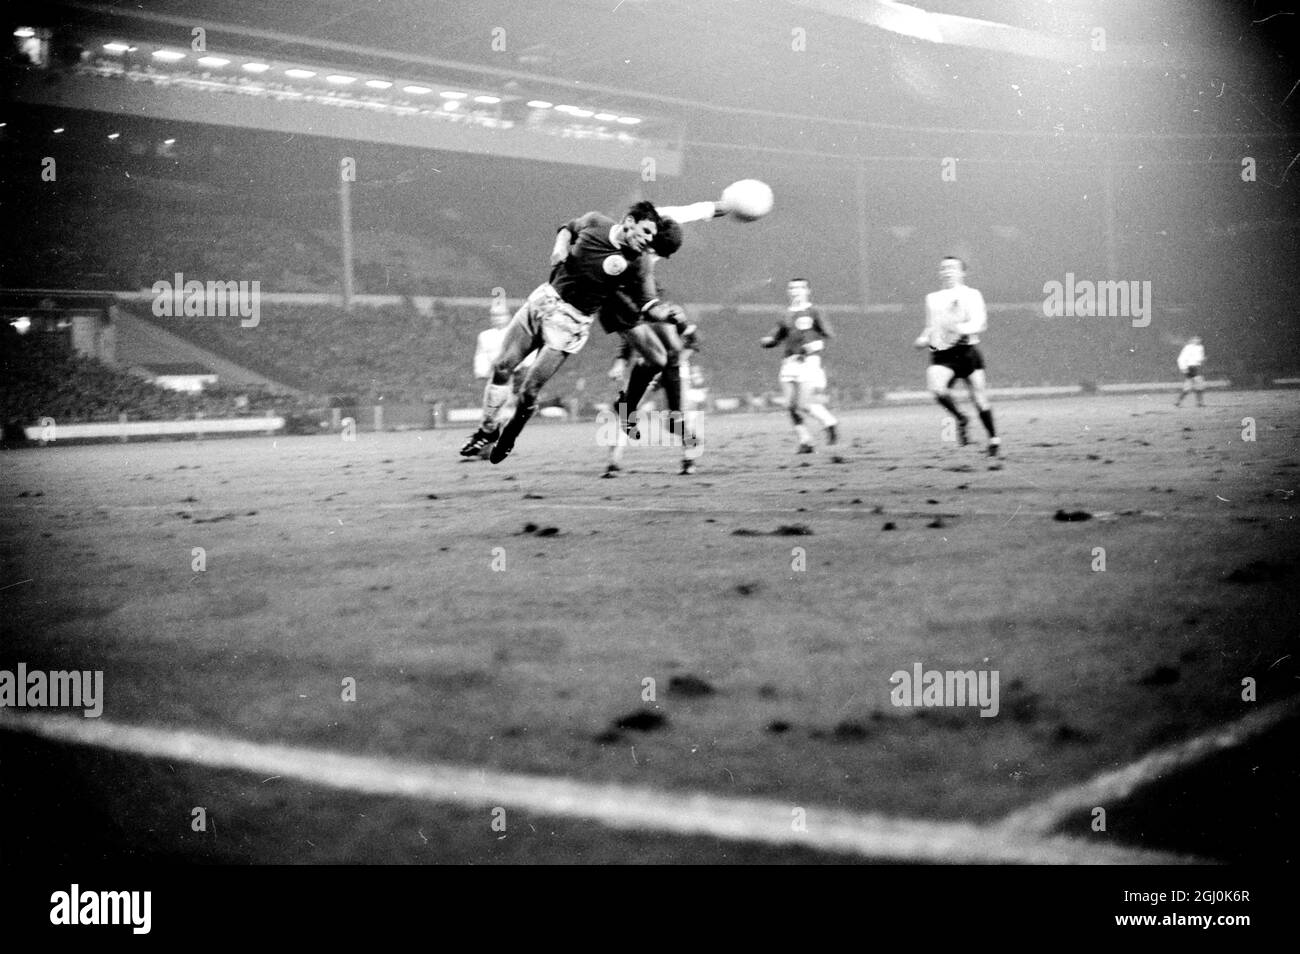 Wembley, Middlesex: England player Roger Hunt (Liverpool), playing at inside-right (white shirt) and West German player Wolfgang Weber (F.C. Cologne), playing centre-half in tonights football in Association International Match at the Empire Pool between Germany and England , are in acton during the match. The match was played in heavy rain, in soggy conditions; was watched by a crowd estimated at 50,000. Final score was 1 -0 for England, the goal being scored by centre-forward stiles int 41st minute. 23 February 1966 23 February 1966 Stock Photo